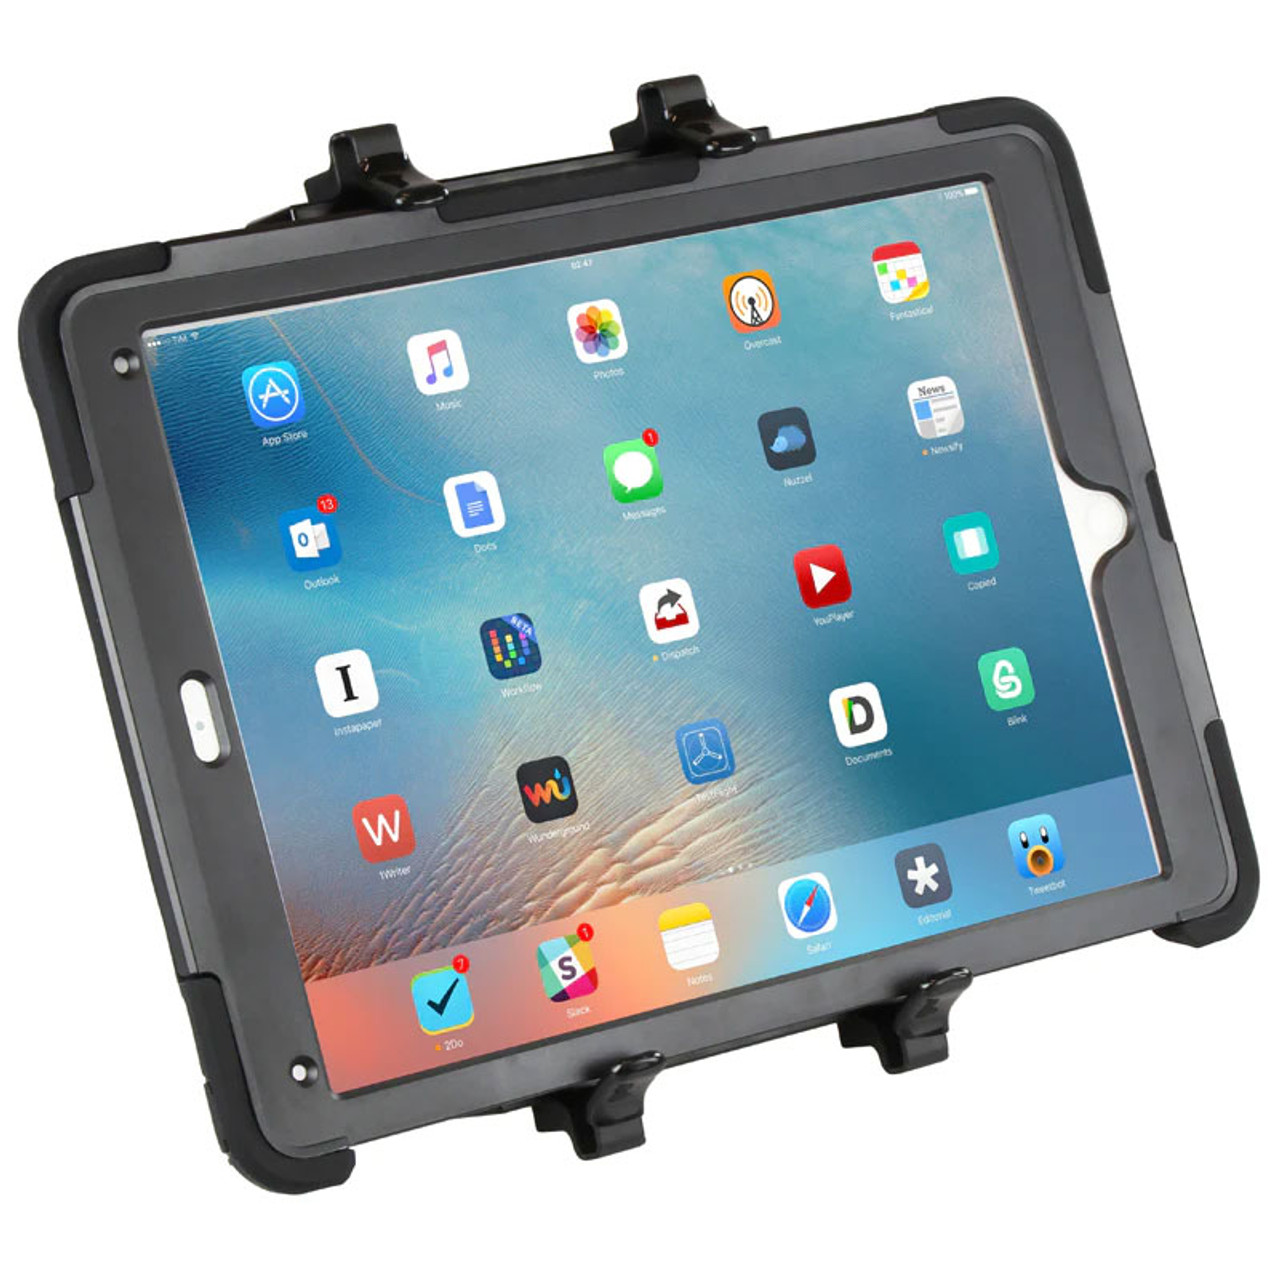 Single Bolt Mounting Bracket for Monitor or iPad